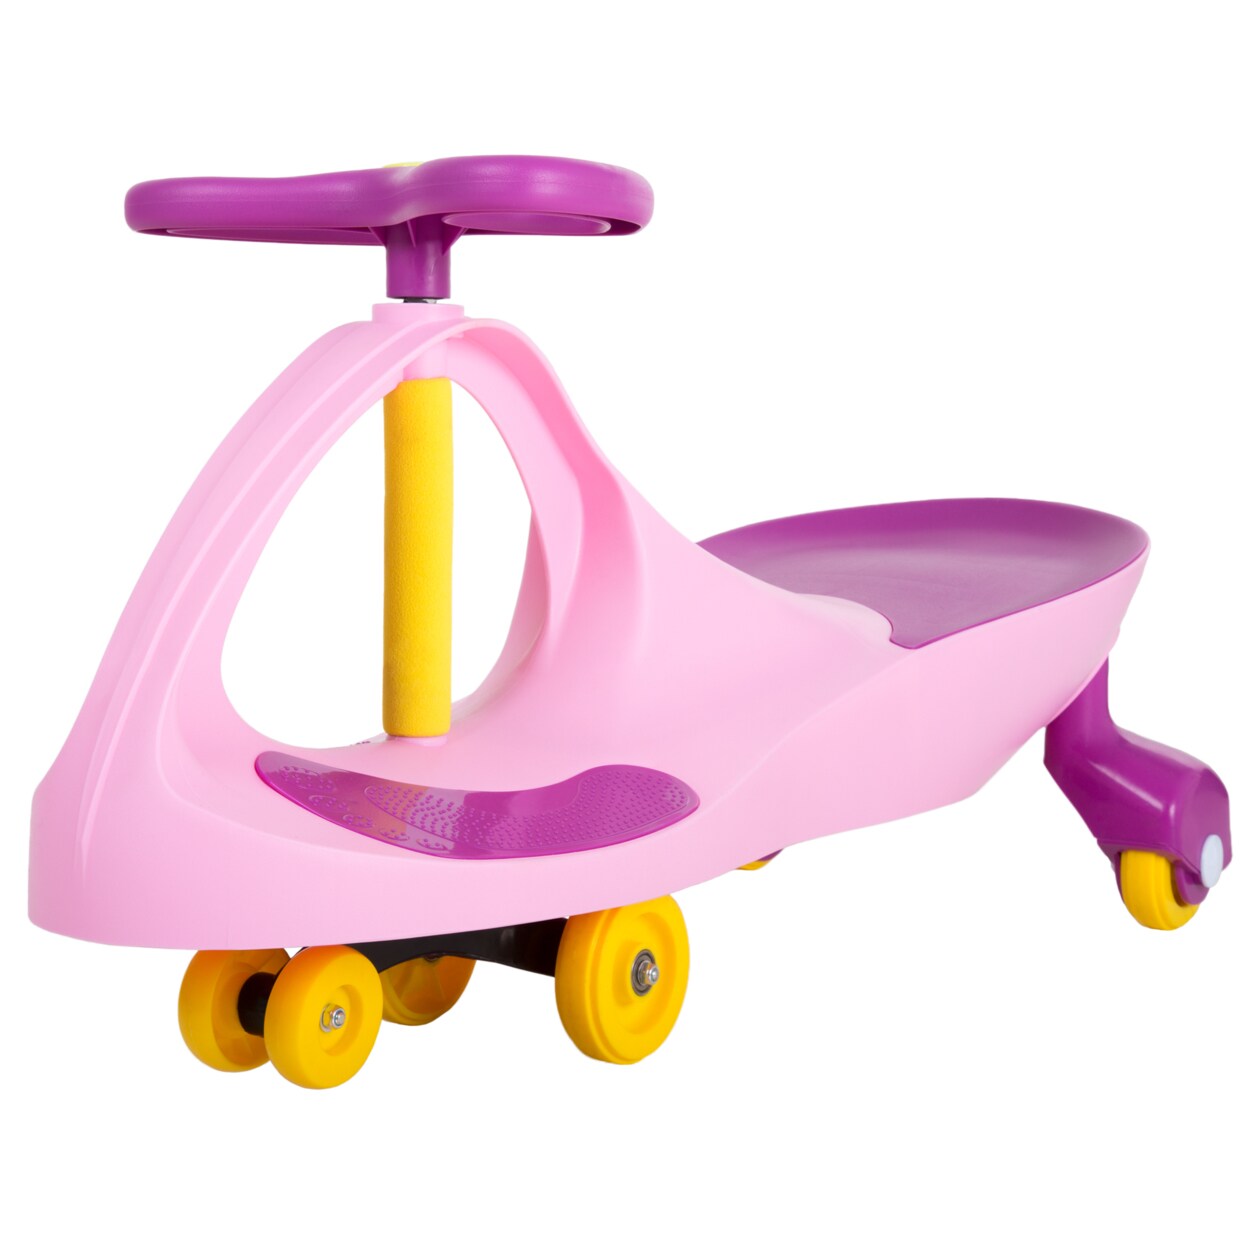 Lil Rider Lil Rider Pink Purple Wiggle Ride On Car Roller Coaster Car Energy Powered Ride On 9252